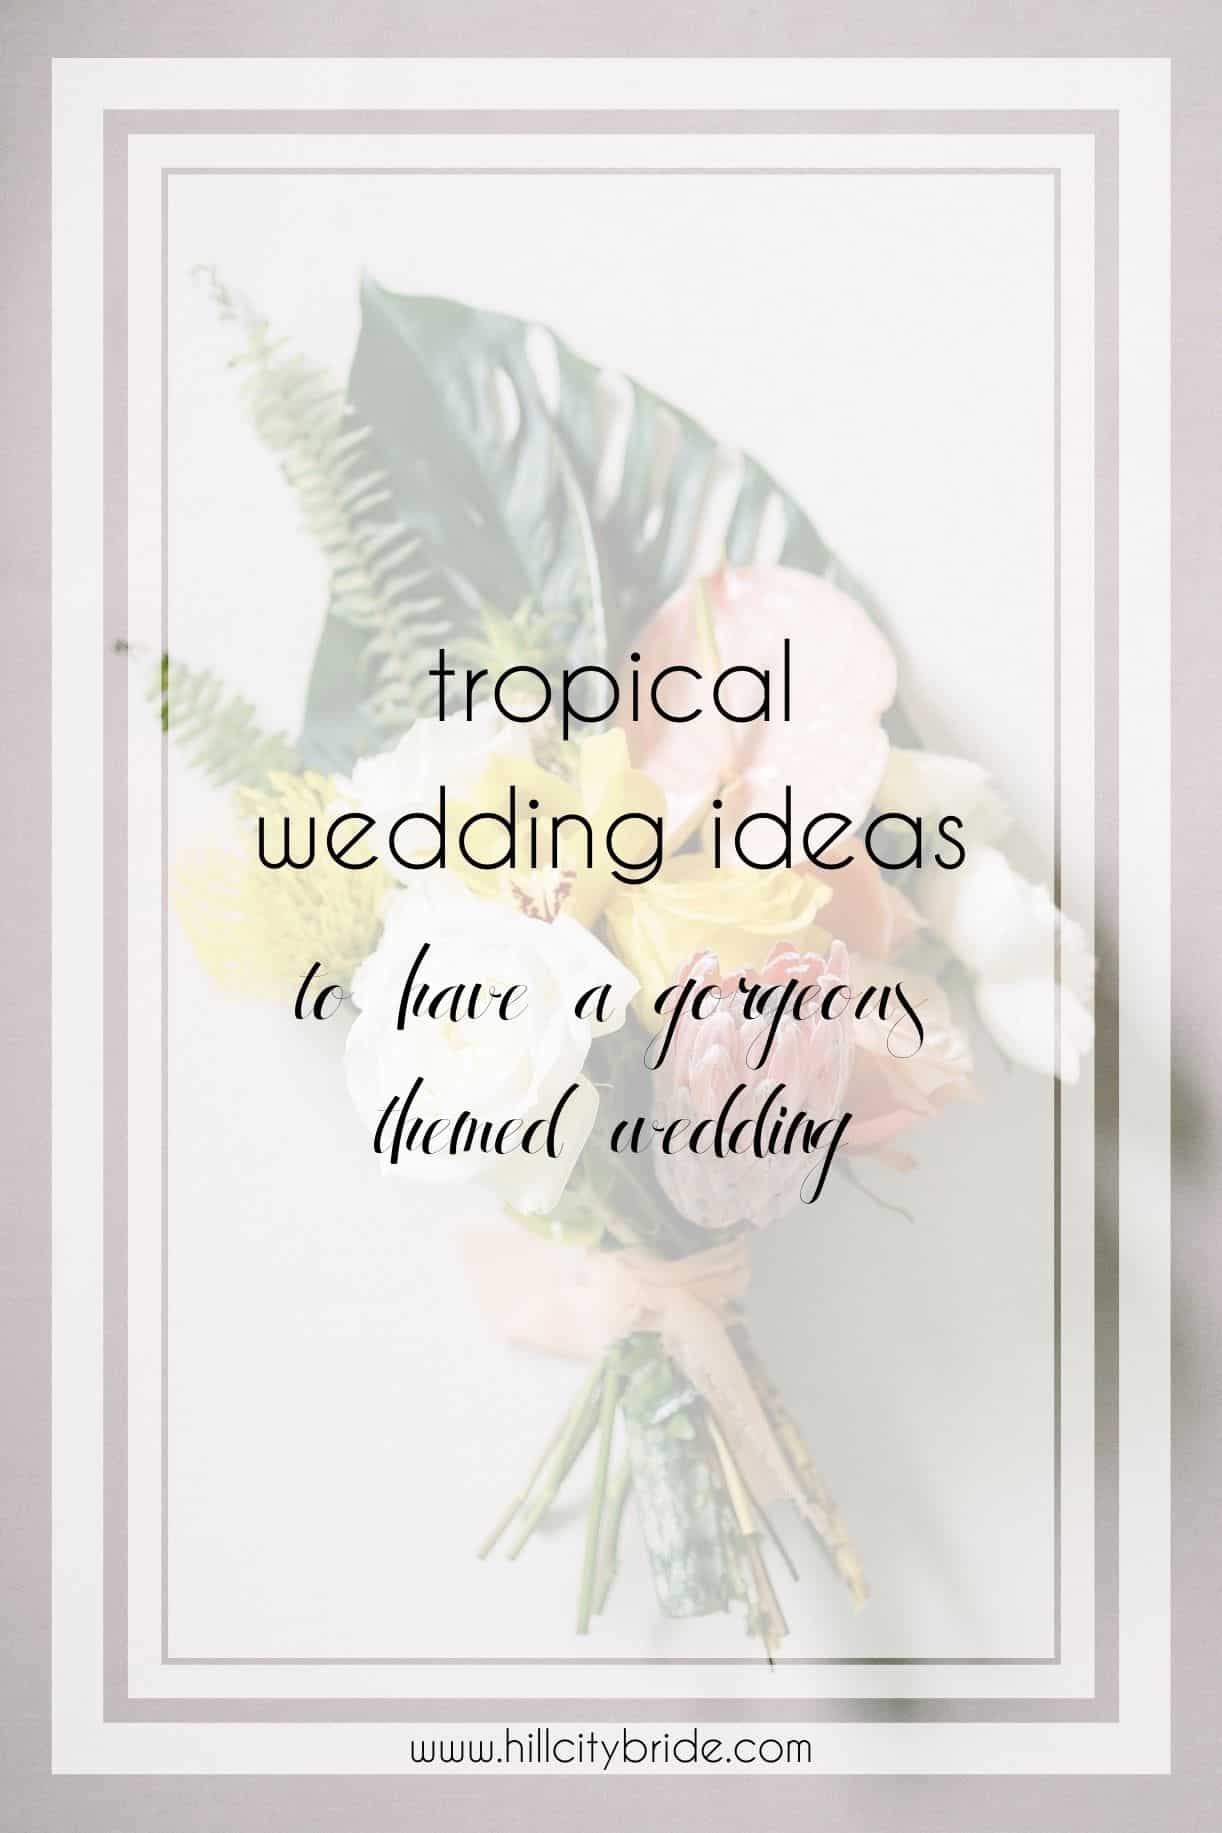 How to Use Tropical Wedding Inspiration to Have an Amazing Big Day